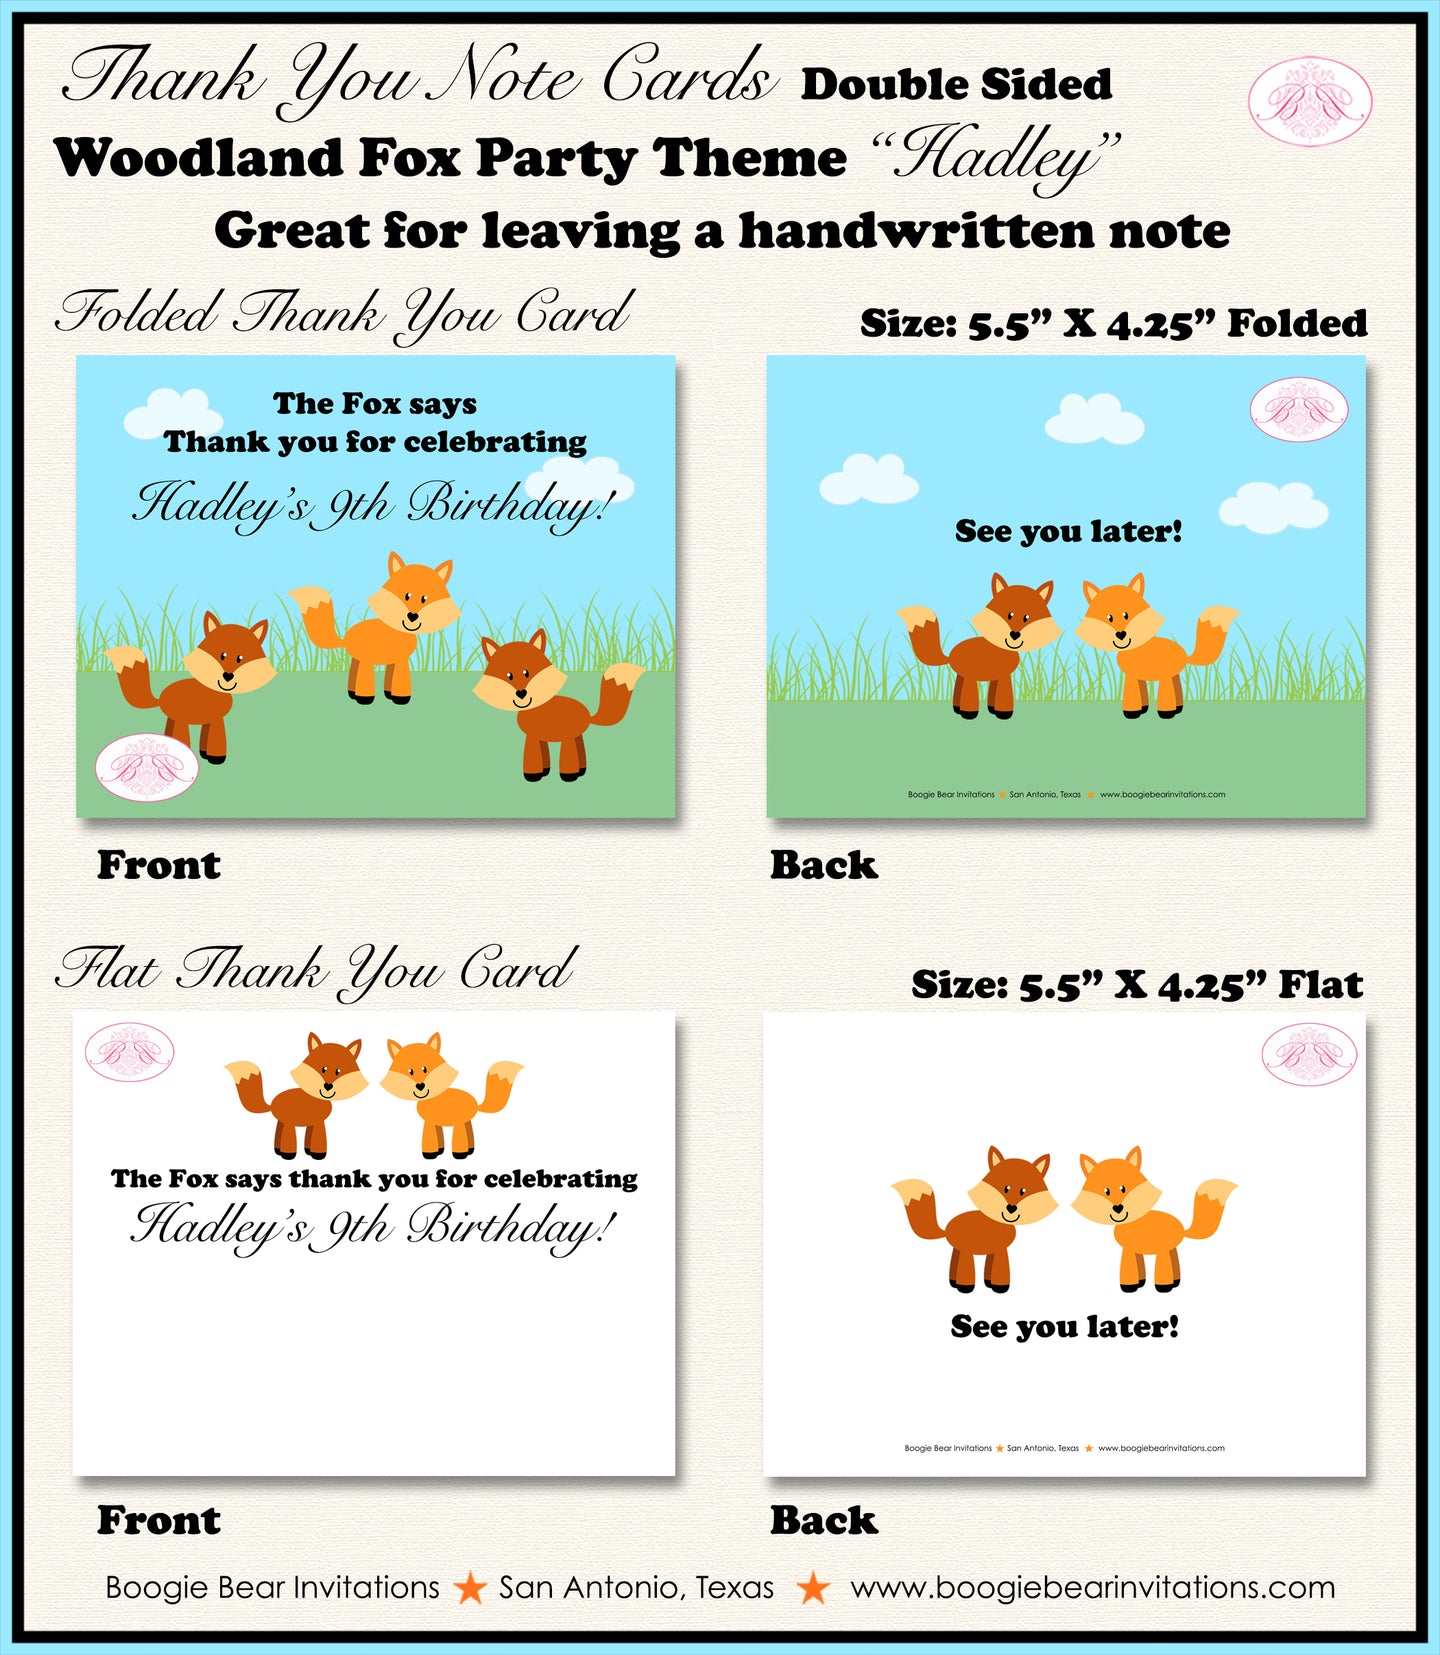 Woodland Fox Party Thank You Card Birthday Forest Animals Creatures Boy Girl Outdoor Picnic Kid Boogie Bear Invitations Hadley Theme Printed